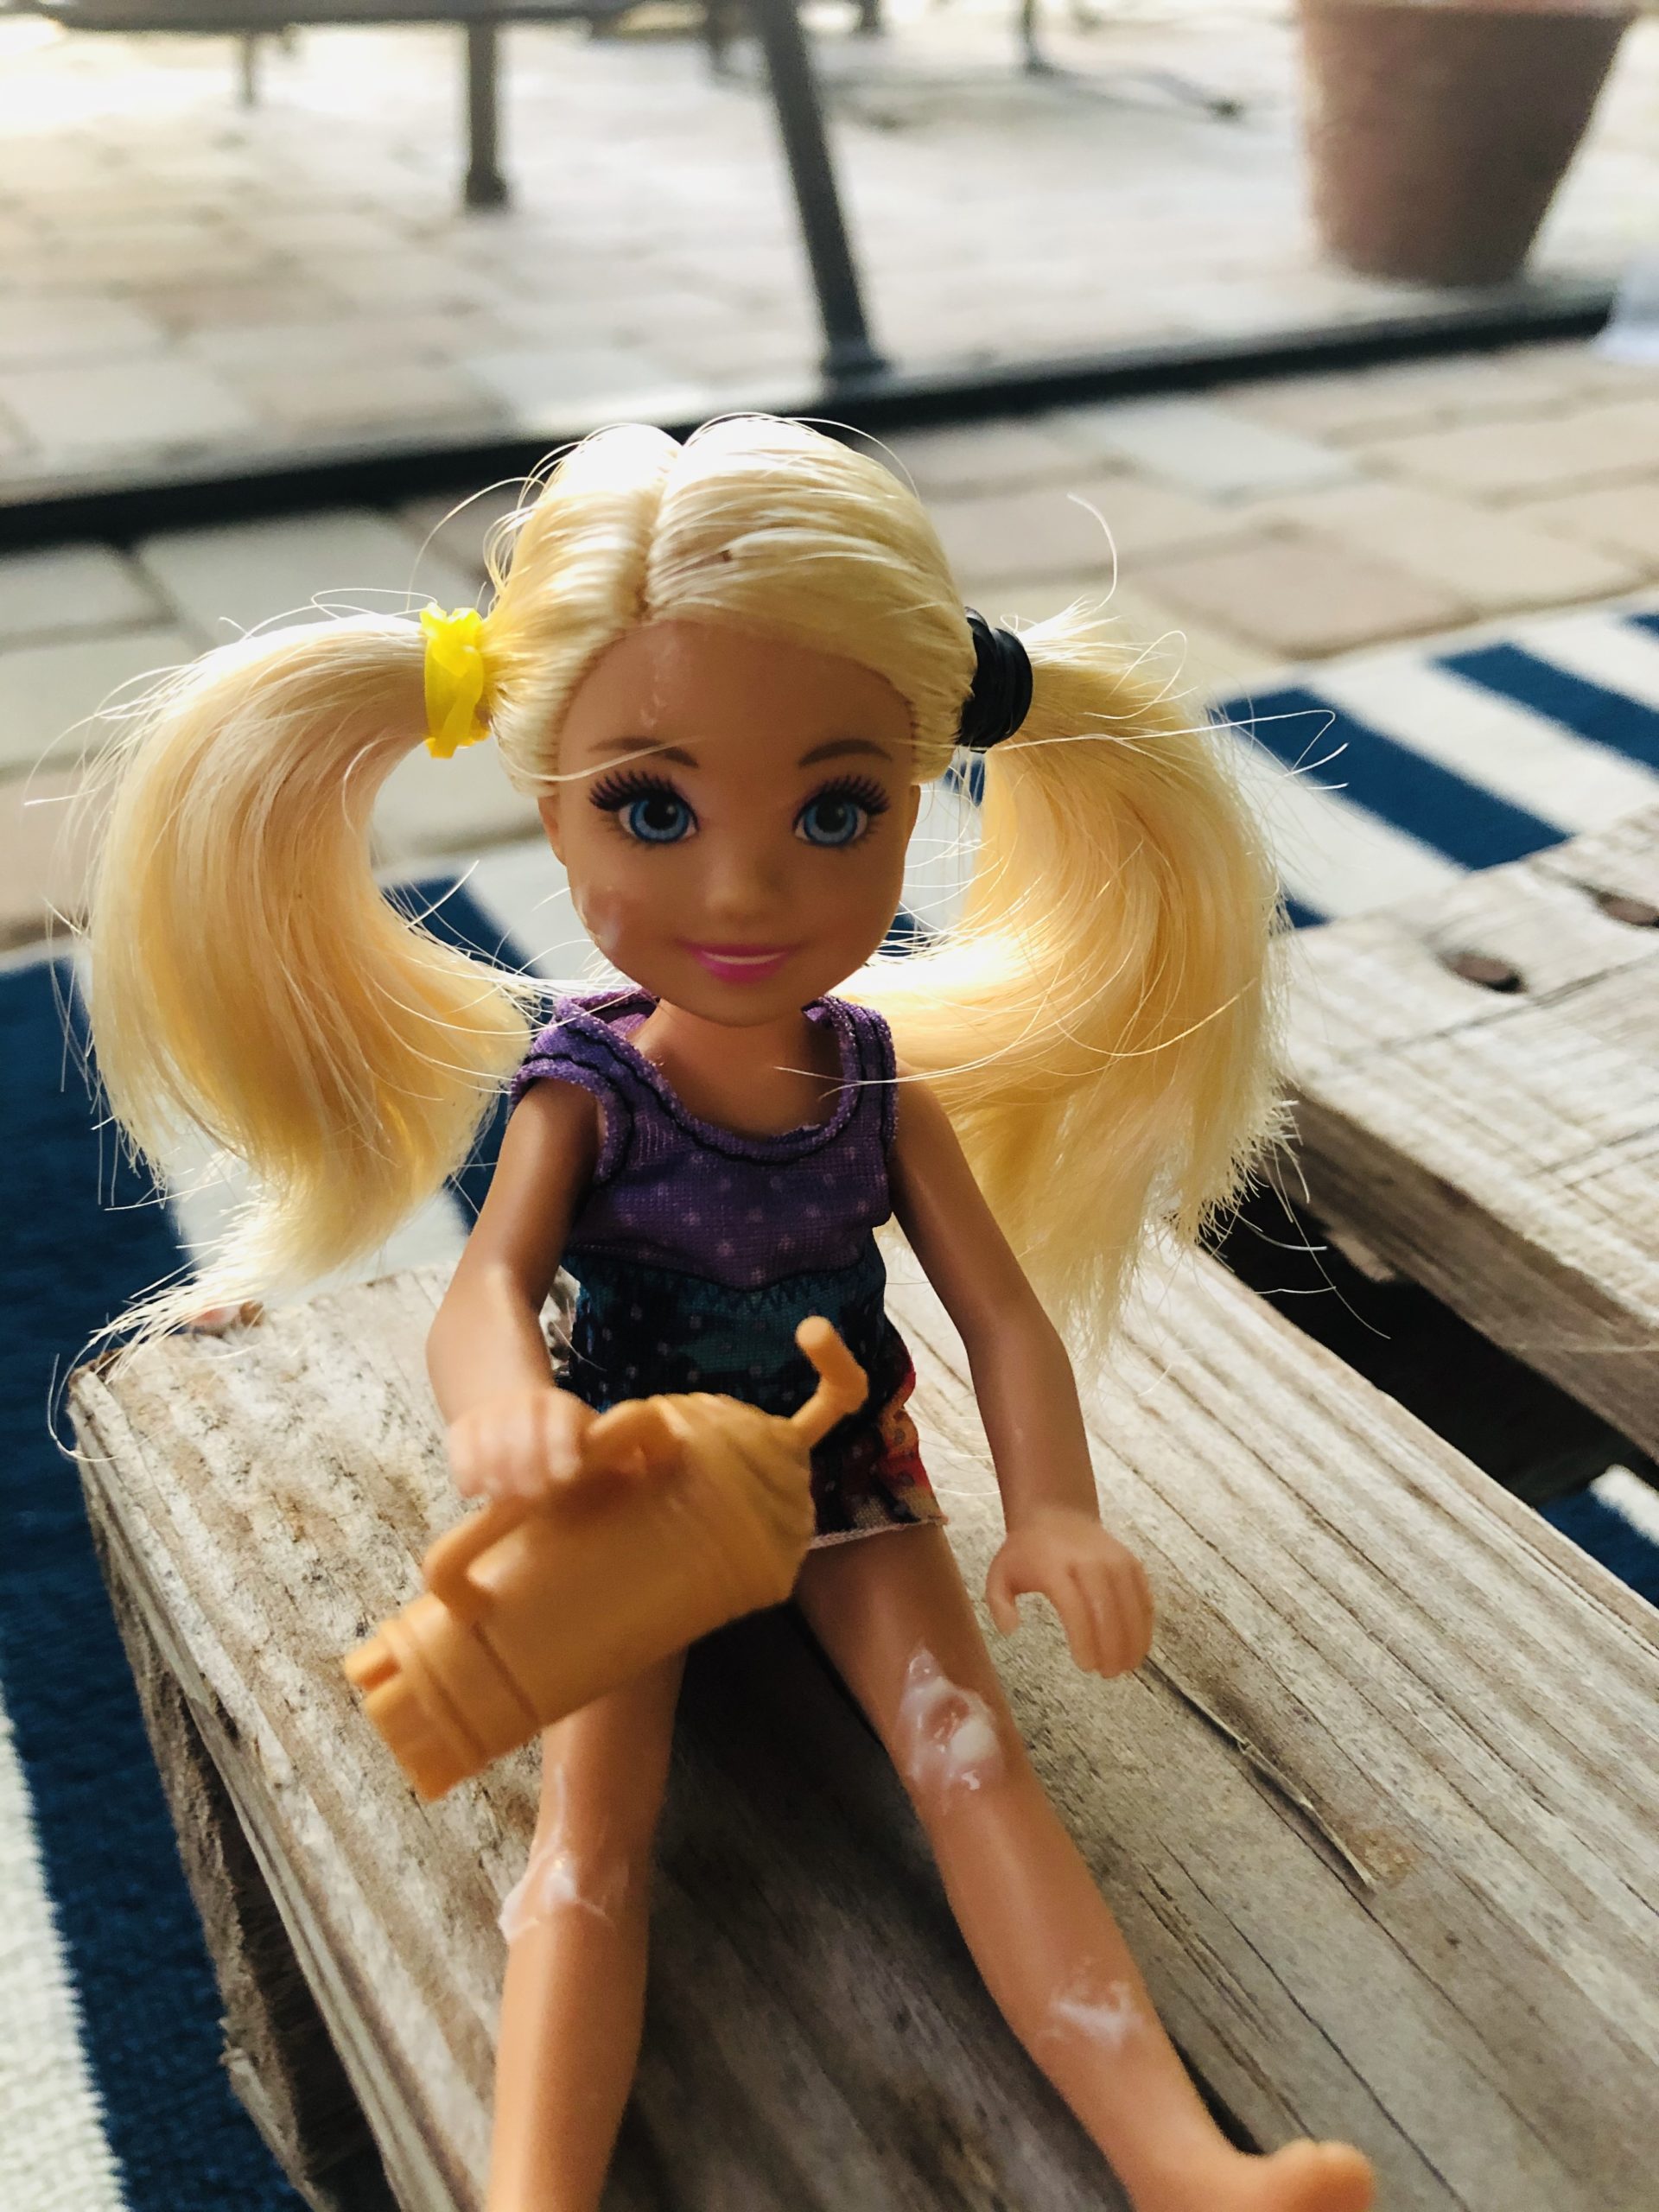 A Chelsea Barbie Doll holding a root beer float. She has blonde pigtails.